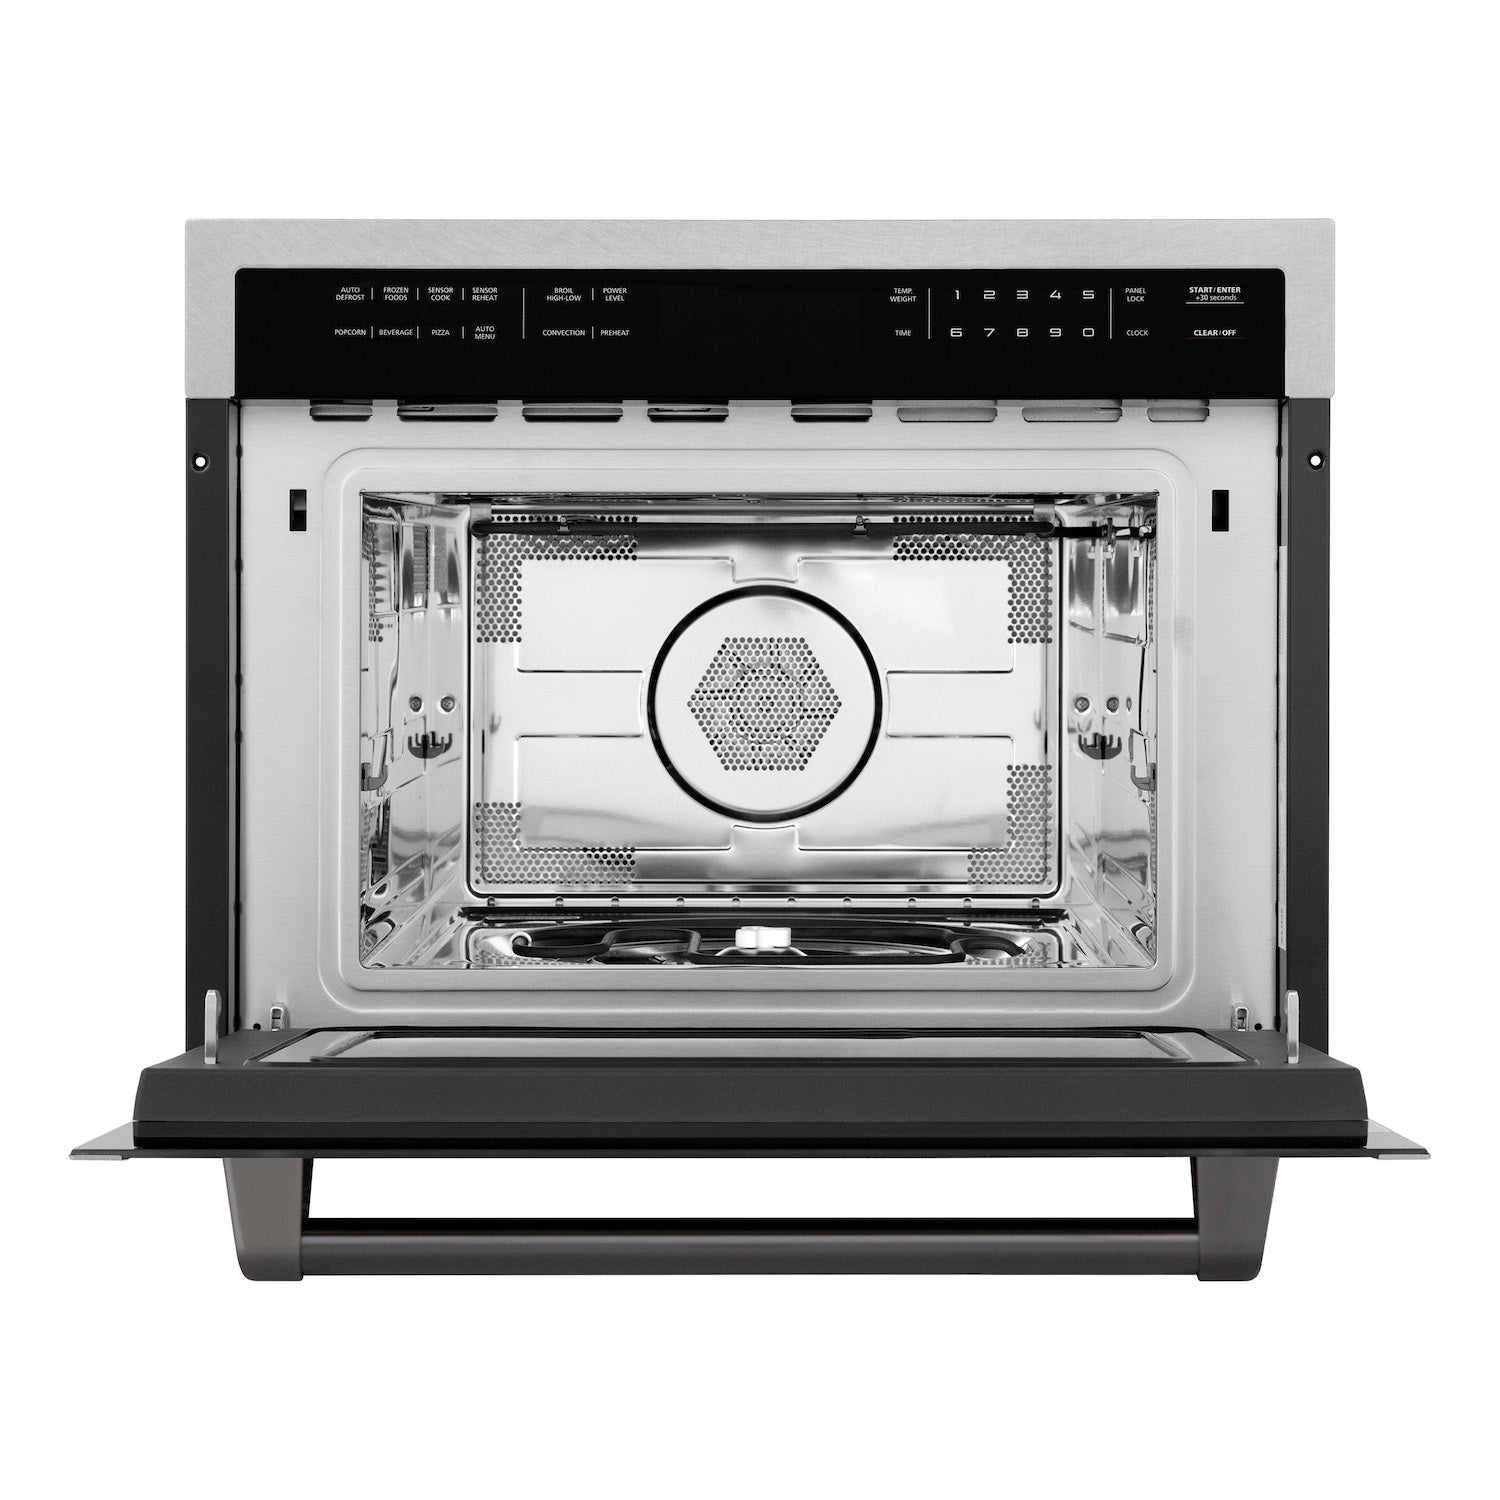 ZLINE Autograph Edition 24 in. 1.6 cu ft. Built-in Convection Microwave Oven in DuraSnow Stainless Steel with Matte Black Accents front with door open.